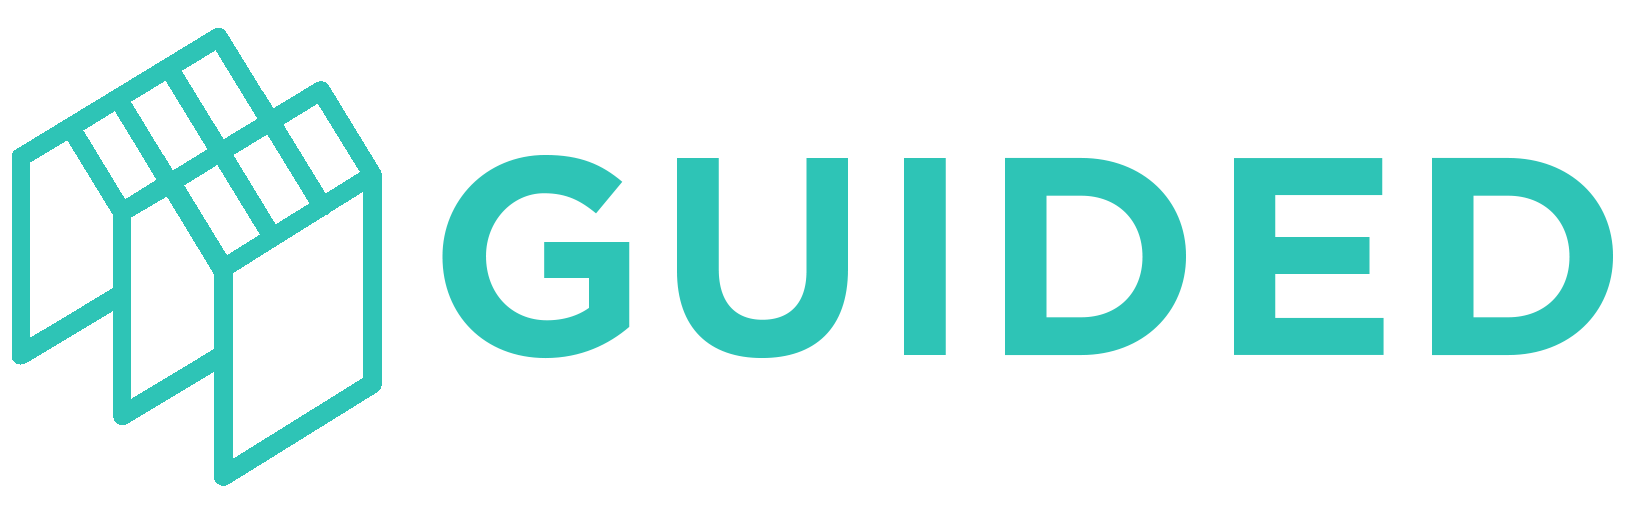 Guided Home - the new home handover compliance and aftercare portal